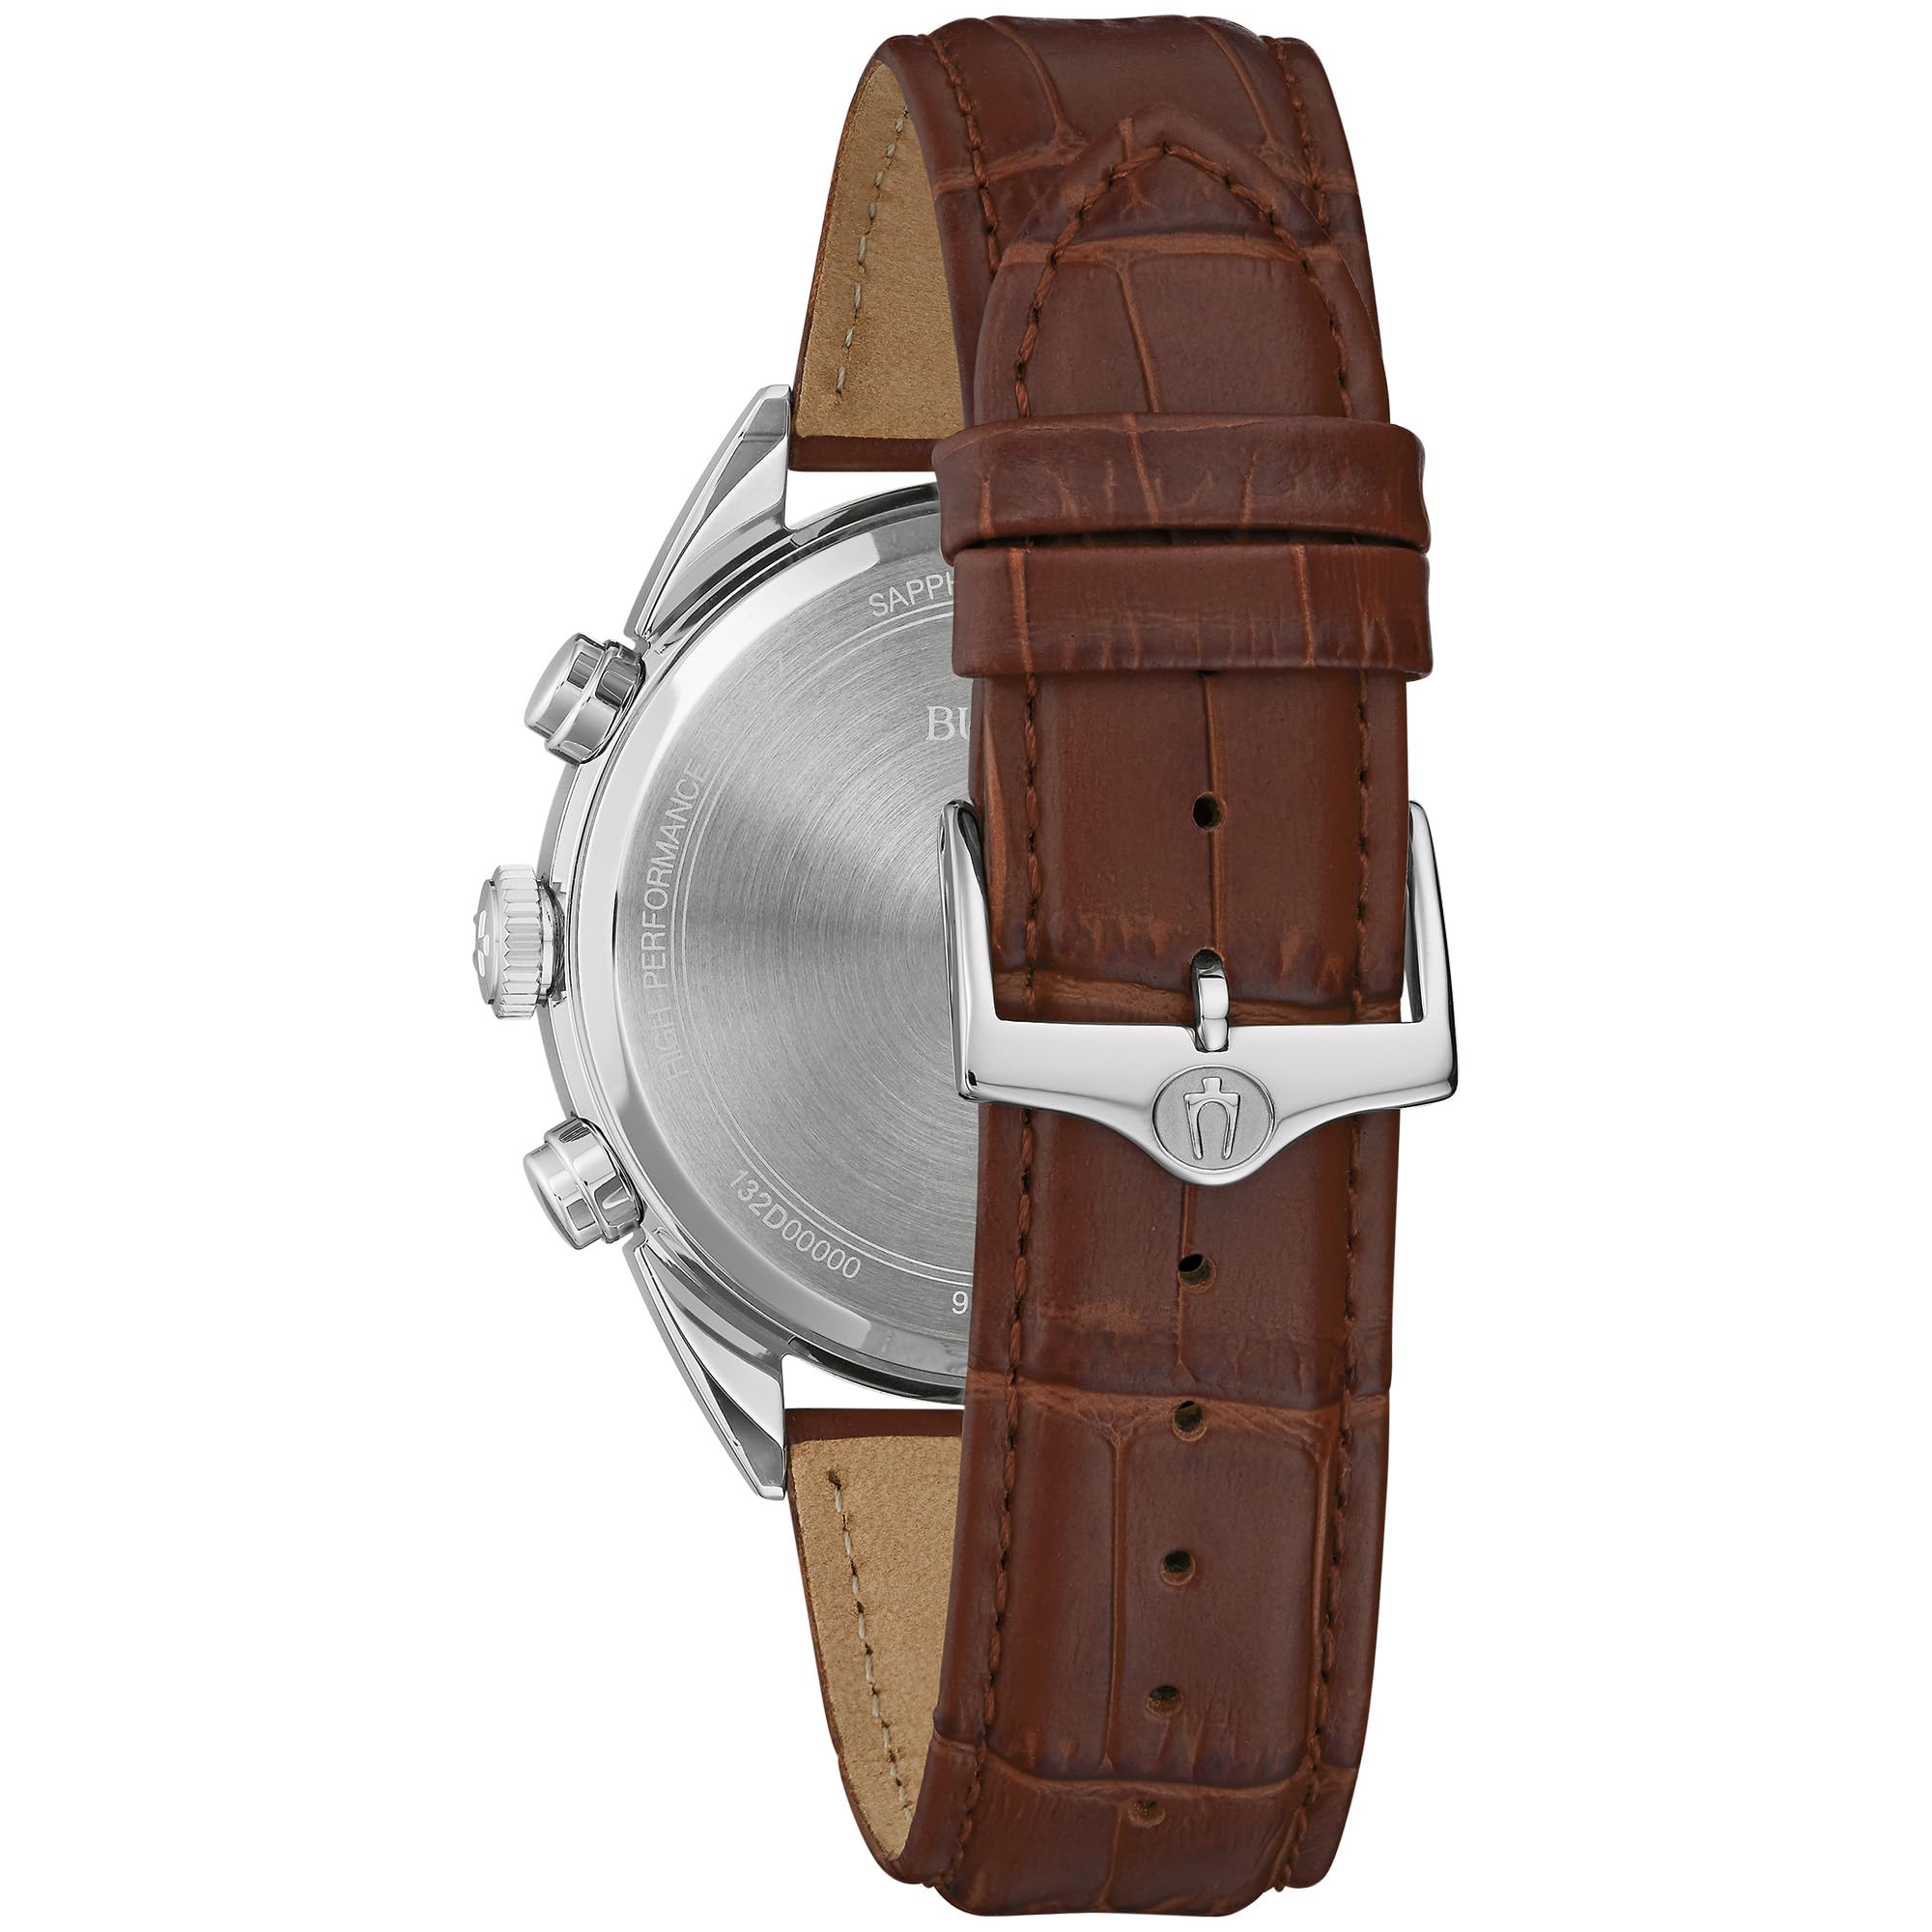 Bulova Men's Classic Sutton 6-Hand Chronograph High PerformanceQuartz Stainless Steel Case Watch with Brown Leather Strap, Silver-White Dial, Style:96B370